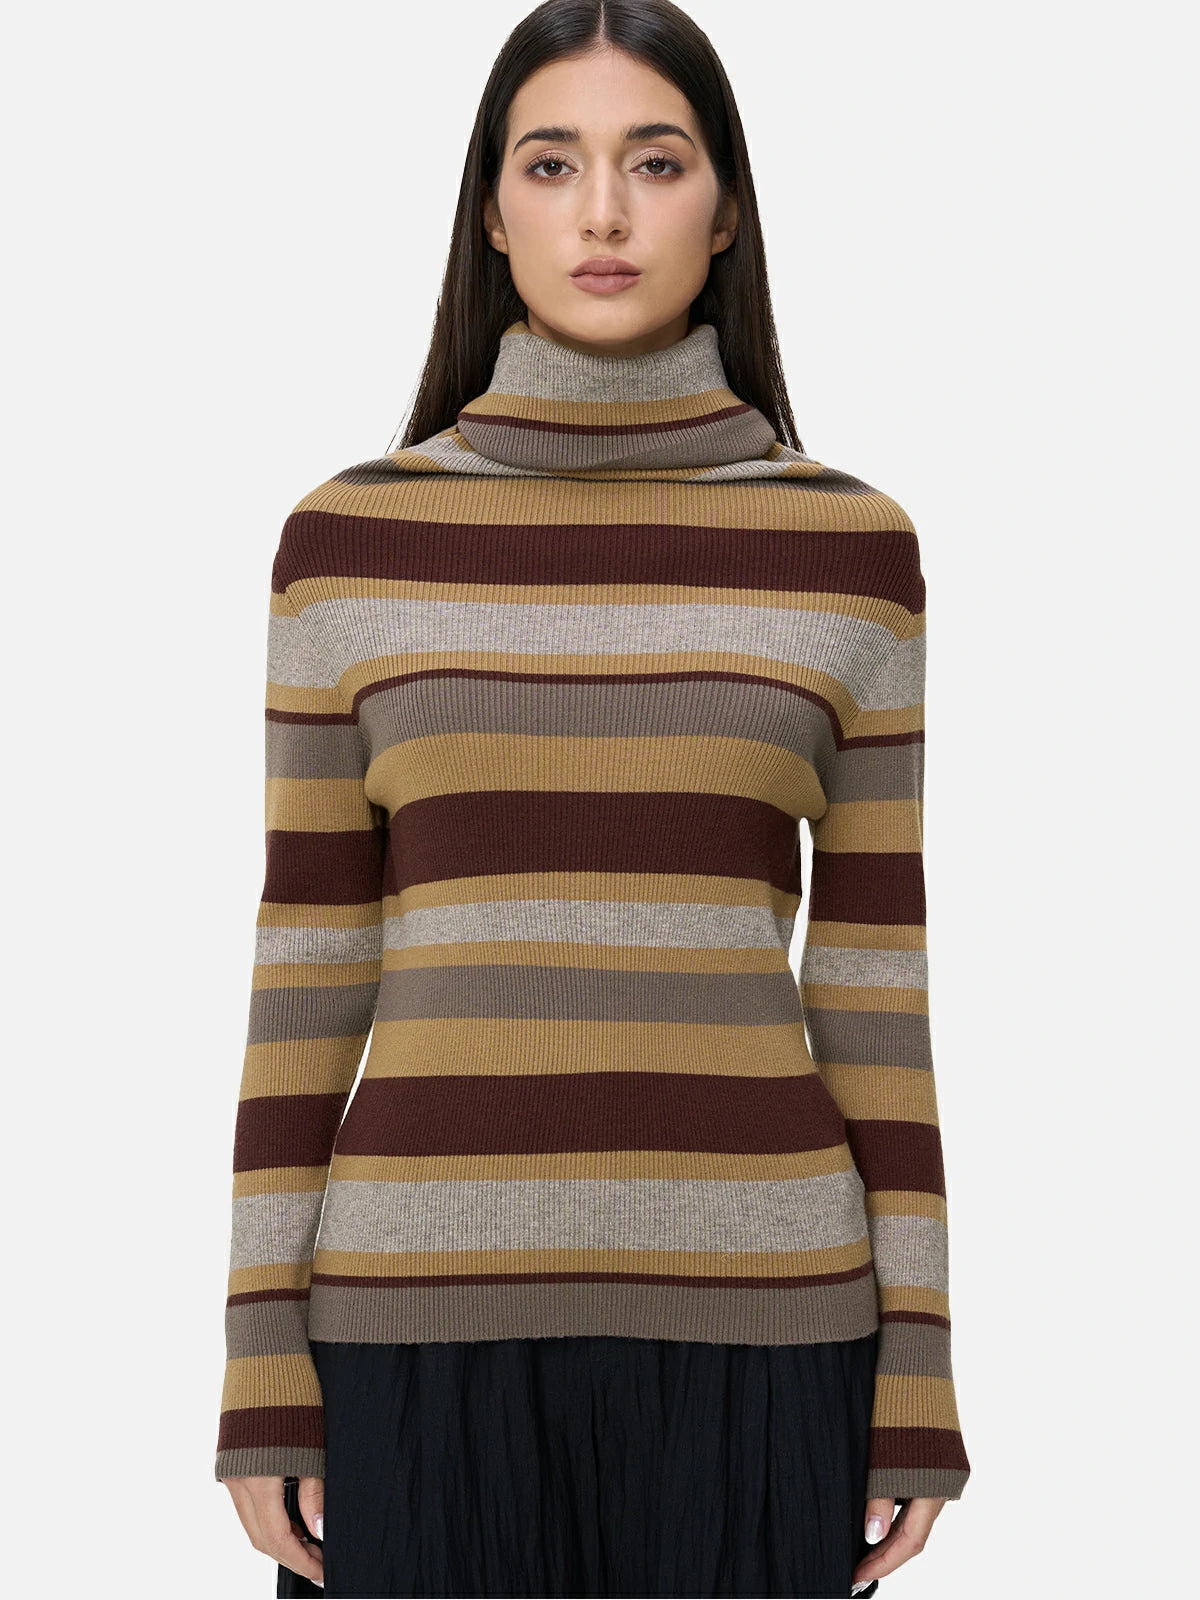 Chic Color-Blocked Turtleneck Knit Sweater for Winter Fashion